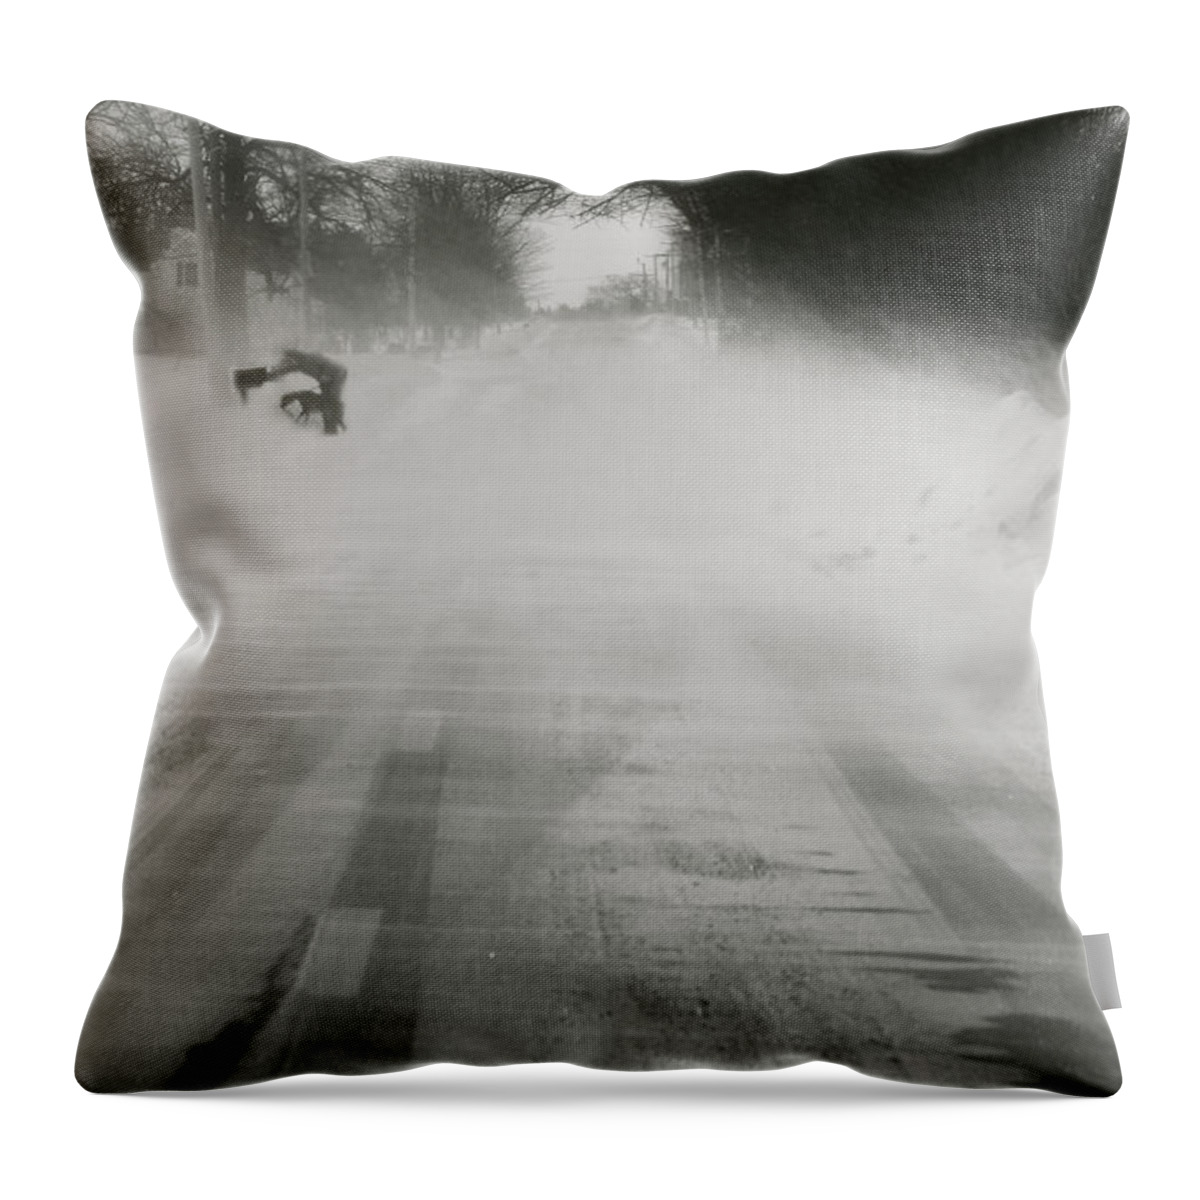 Winter Throw Pillow featuring the photograph Getting Mail by John Meader